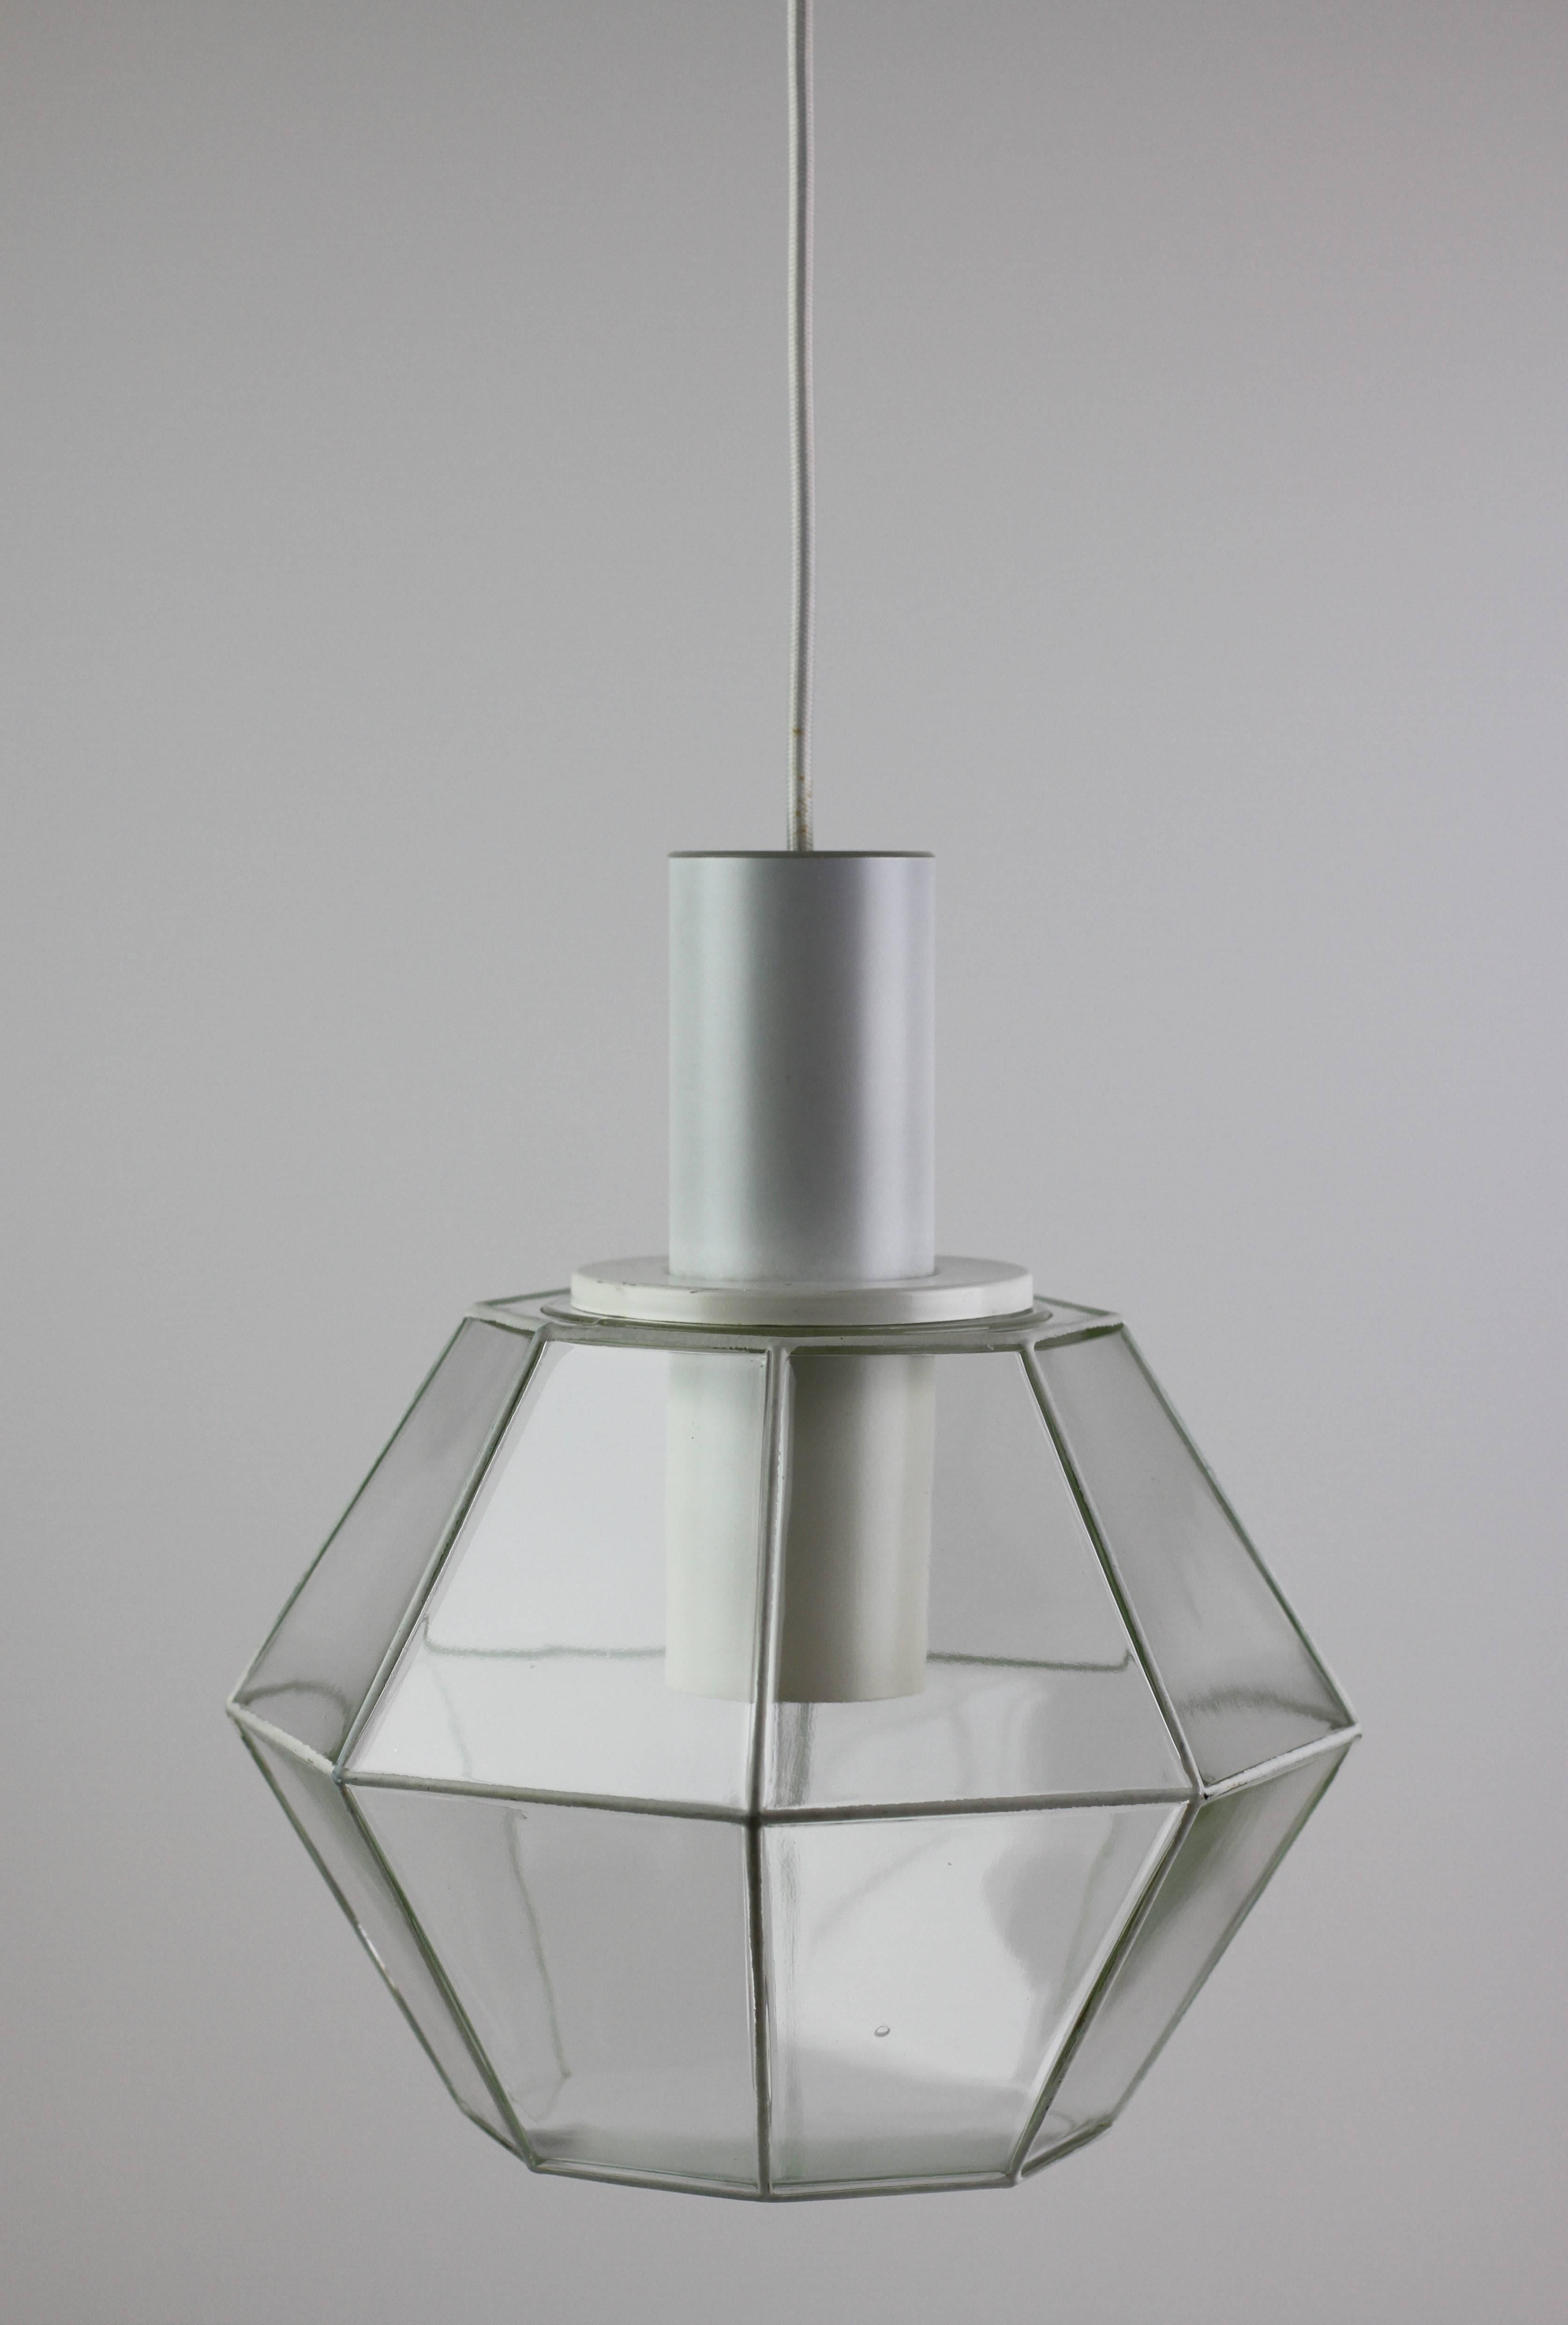 German Limburg 1 of 4 Vintage 1970s Geometric White & Clear Glass Pendant Lights Lamps For Sale